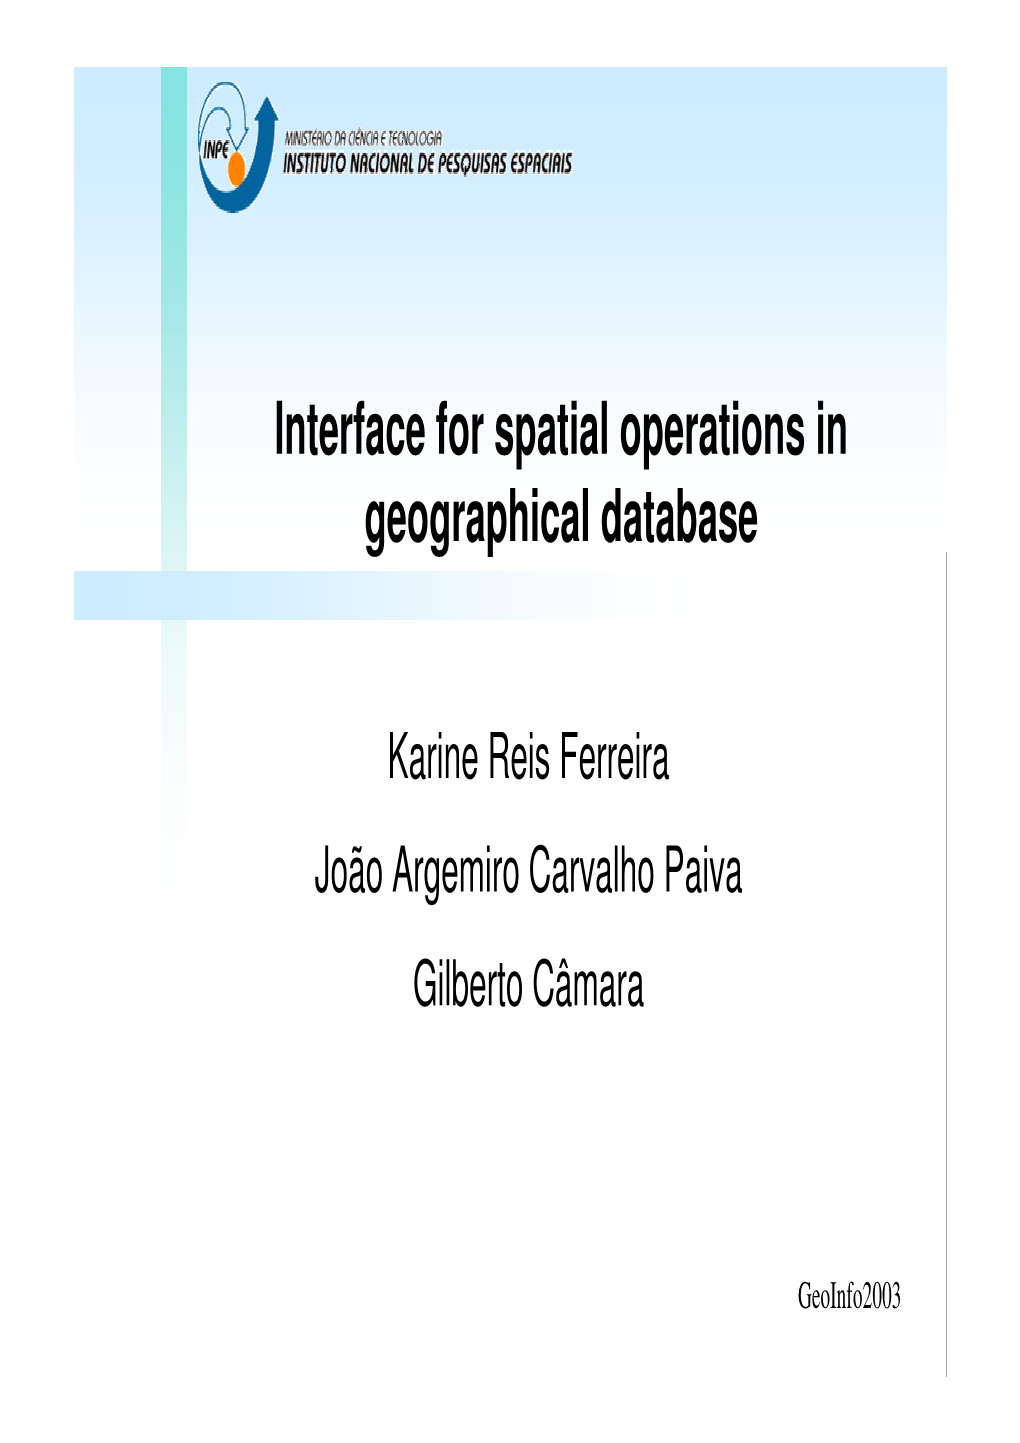 Interface for Spatial Operations in Geographical Database